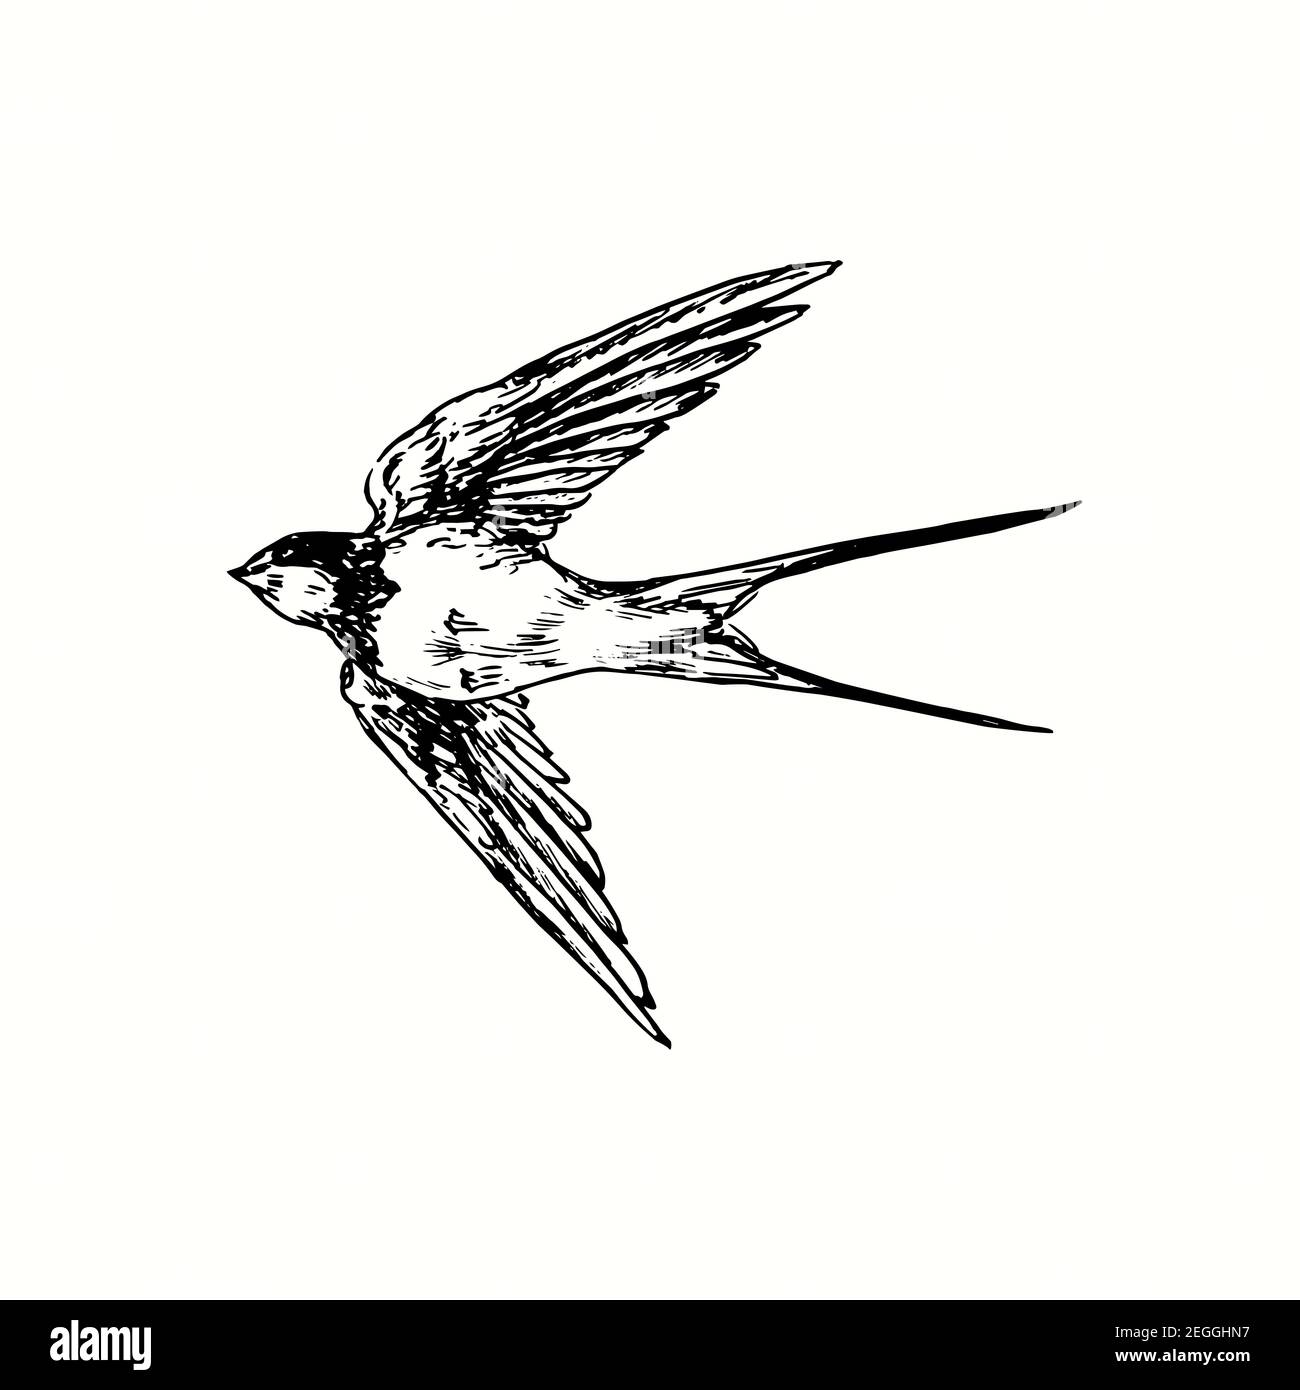 Hand drawn swallow bird flying. Ink black and white drawing